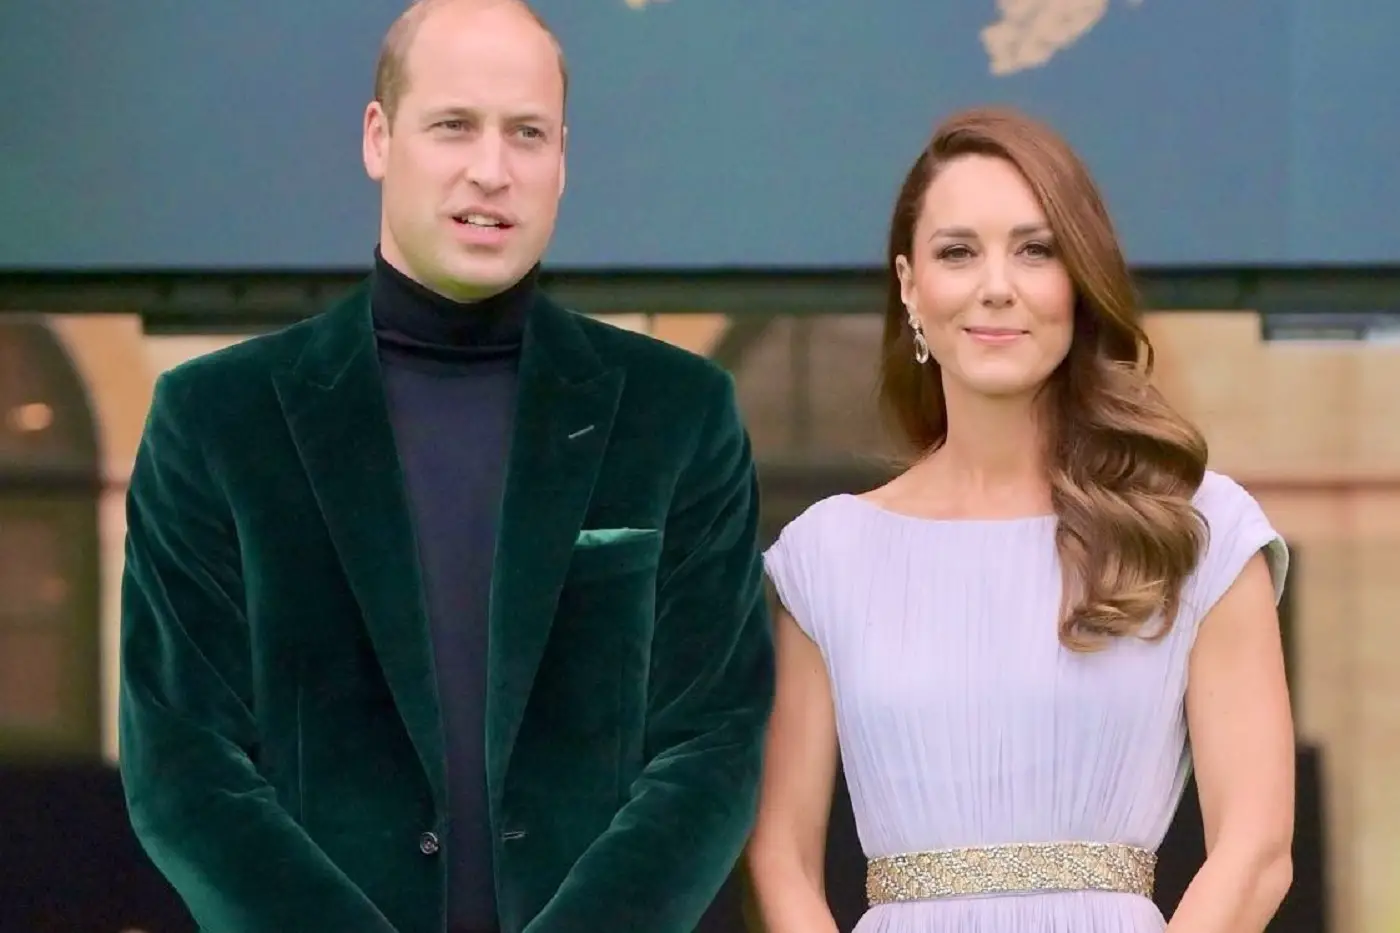 The Duke and Duchess of Cambridge are getting ready for a Caribbean tour